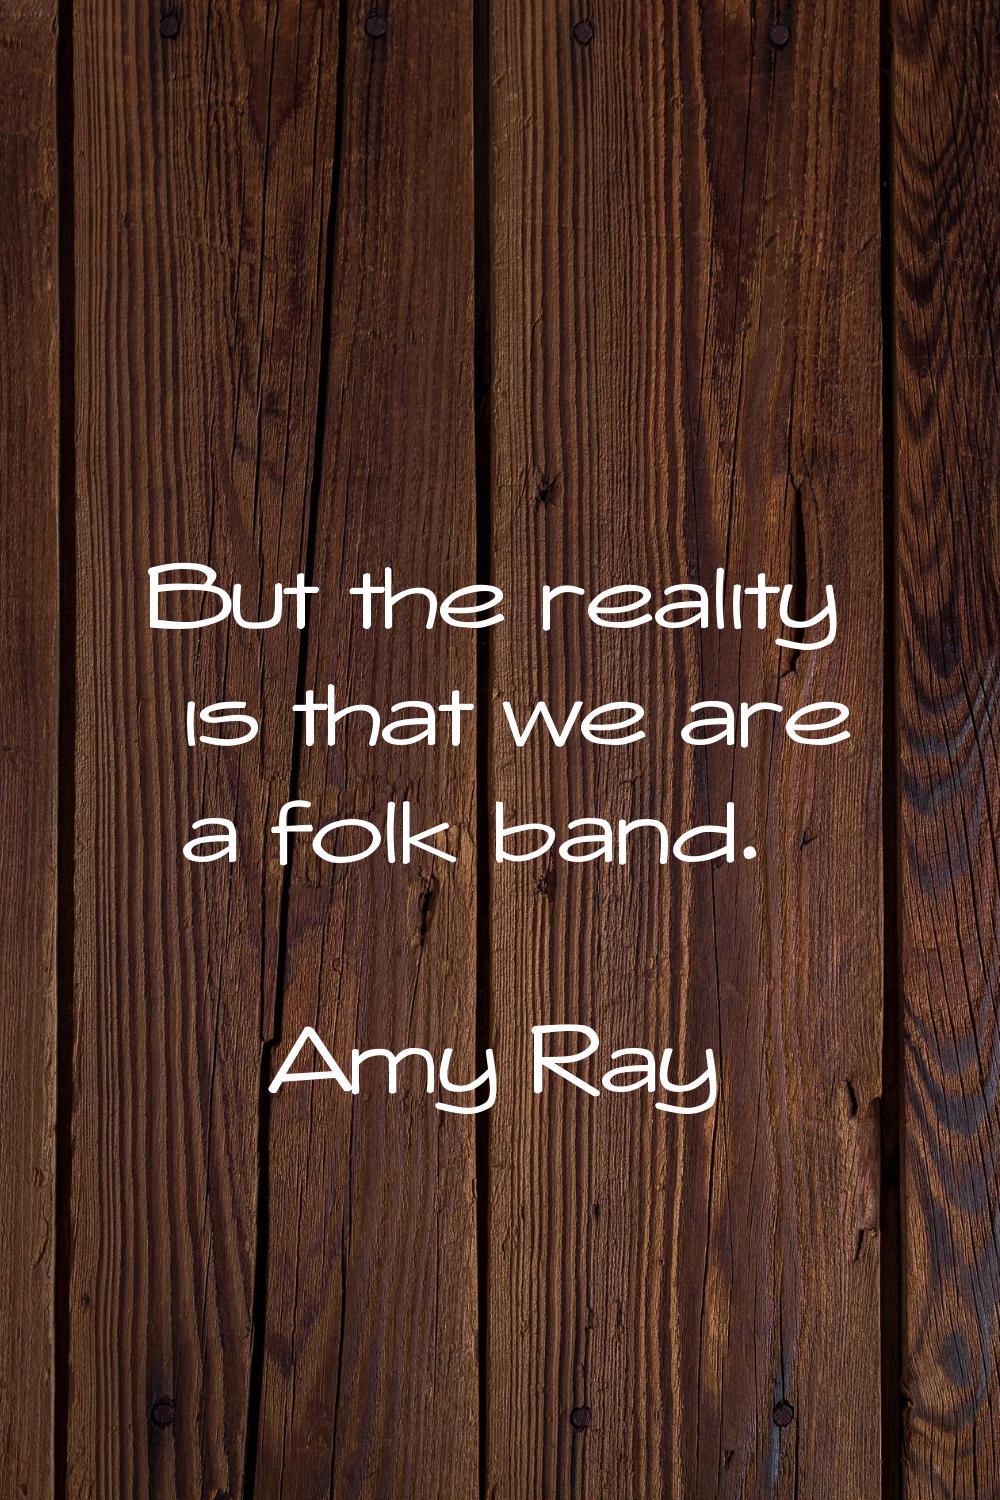 But the reality is that we are a folk band.